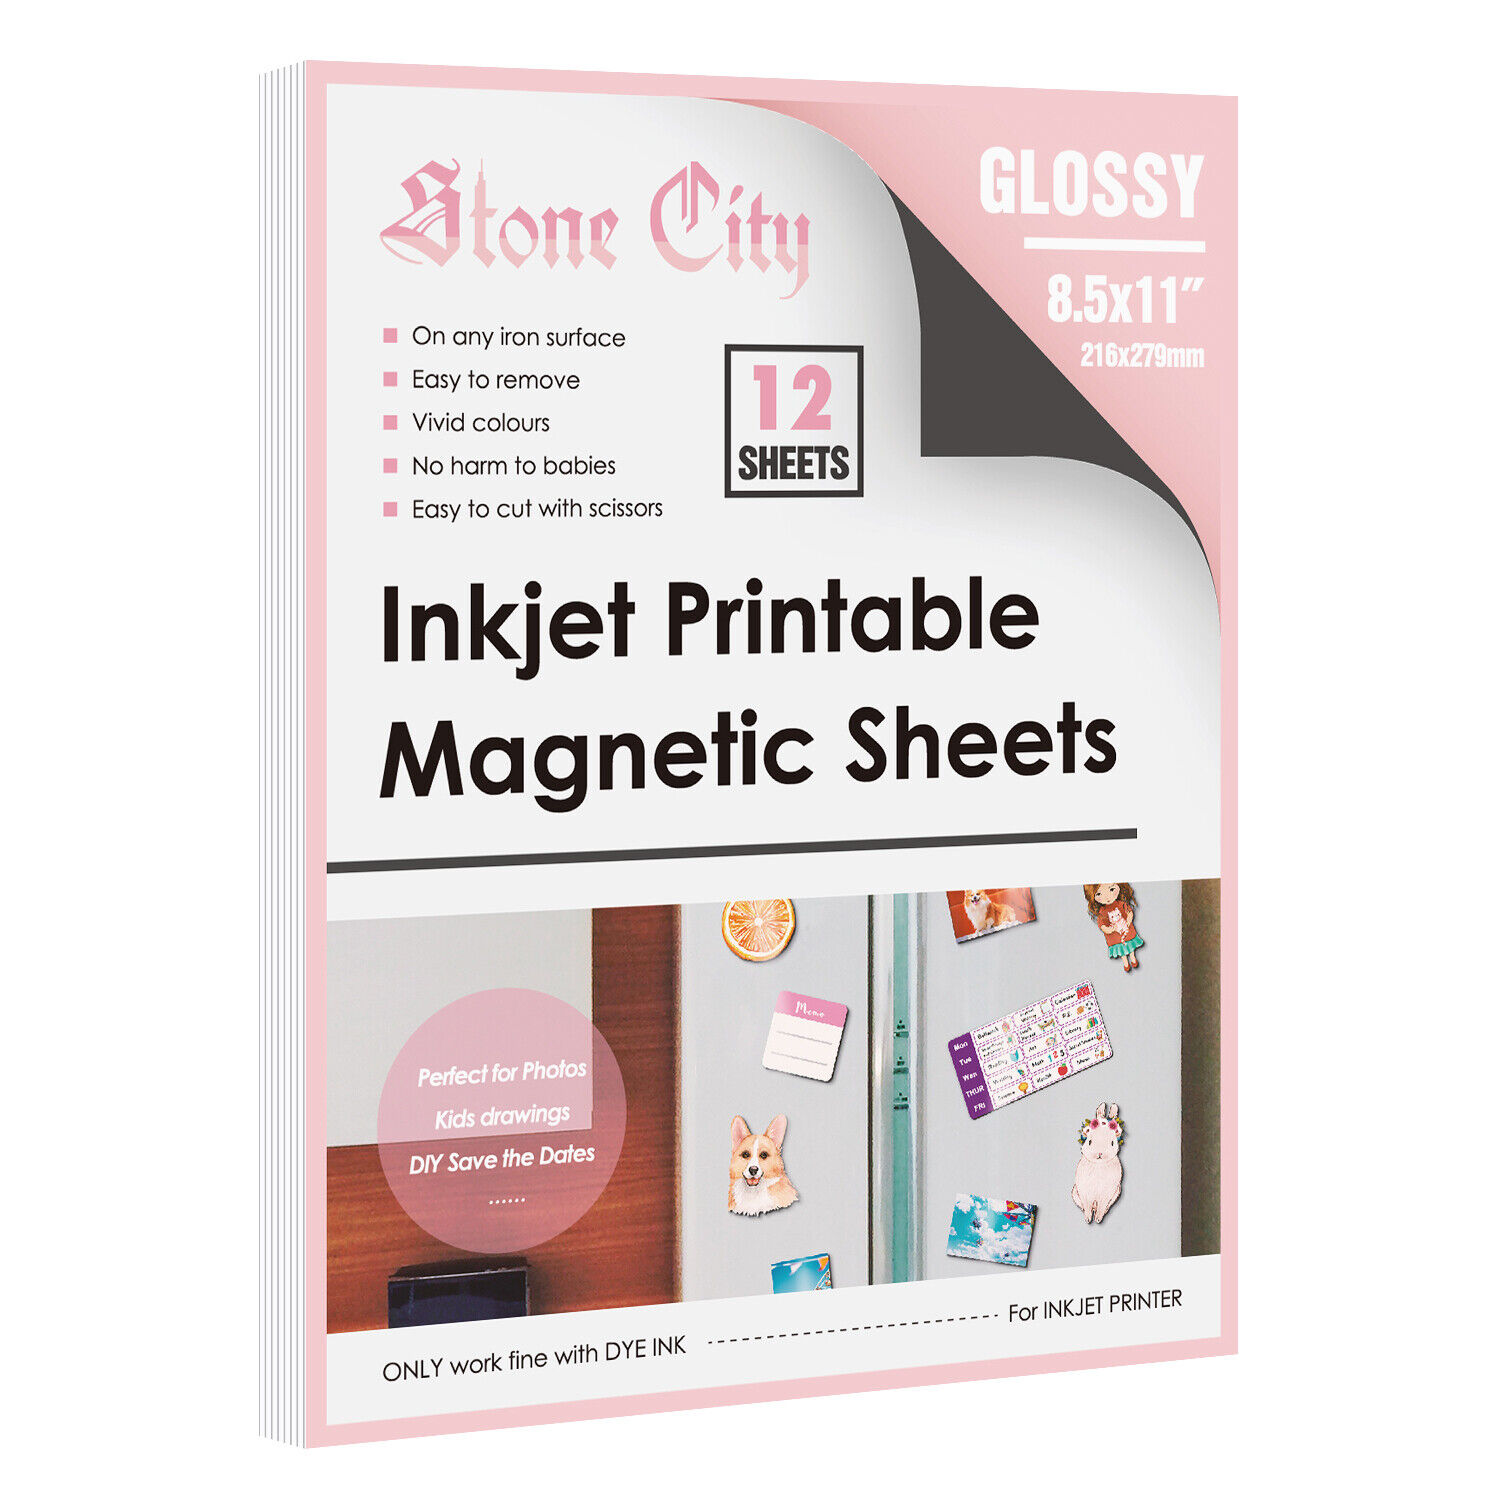 12 Sheets GLOSSY Printable Magnetic Photo Paper for Inkjet Laser Printers 8.5x11